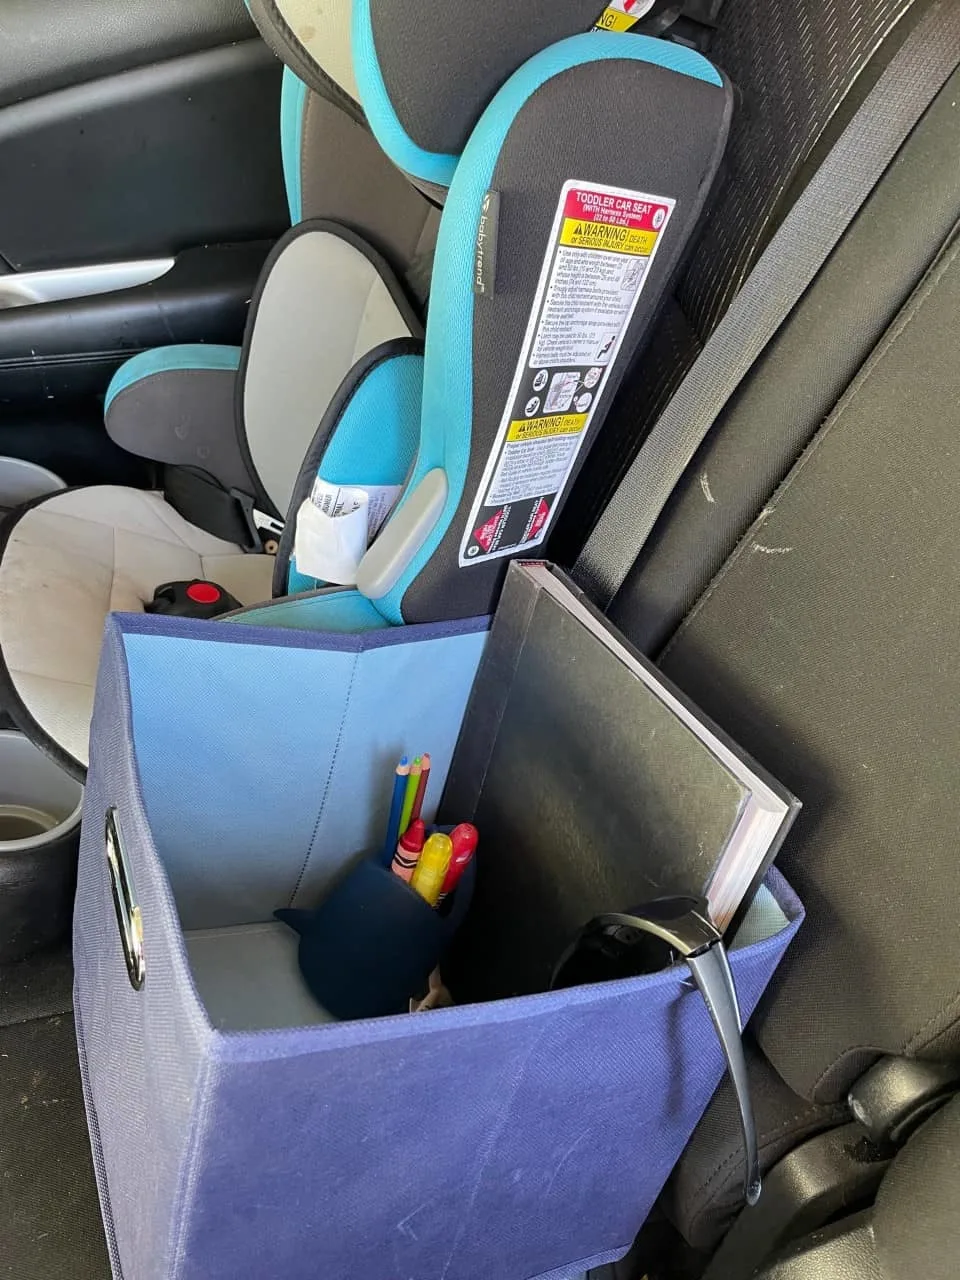 cloth bin next to child seat with sunglasses, rubber shark toothbrush holder with window paint markers and crayons, and book